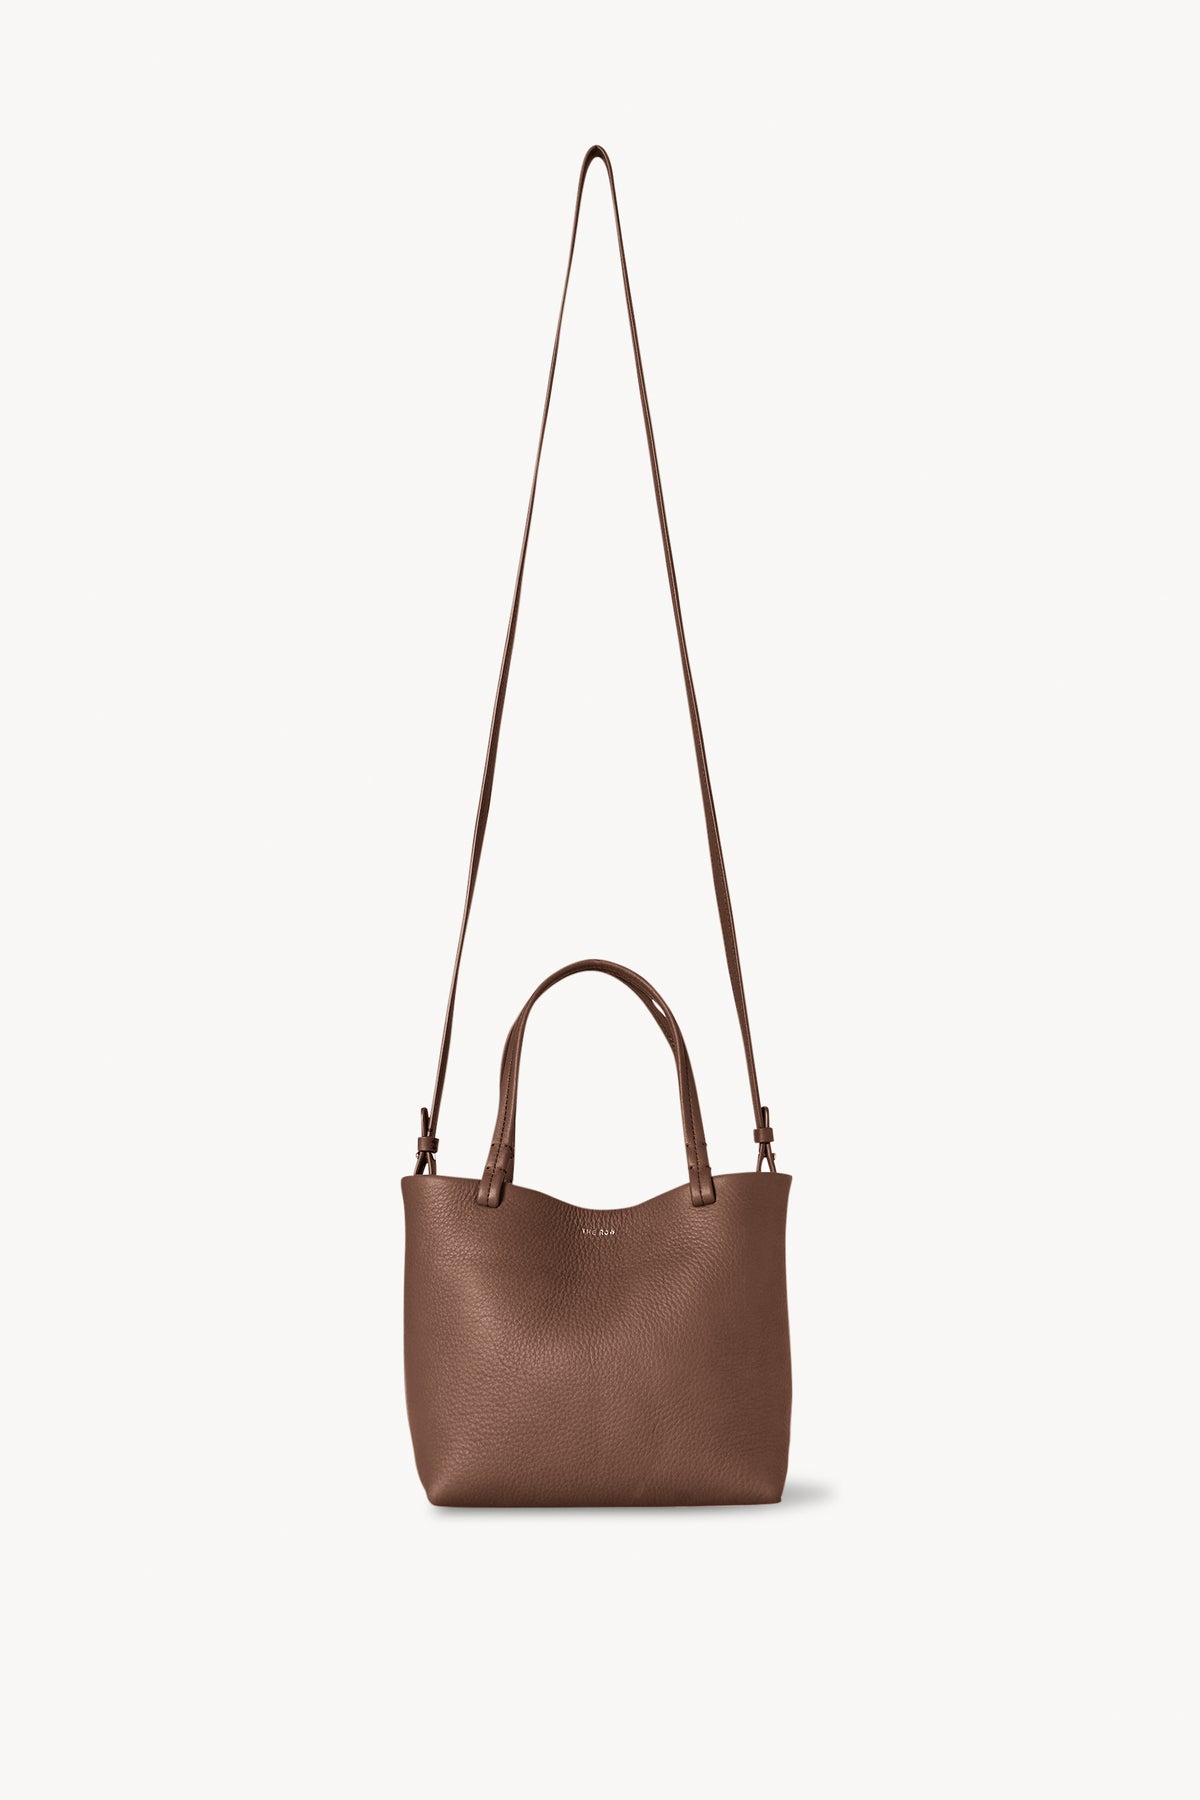 The Row Small Park Tote Bag in Taupe PLD